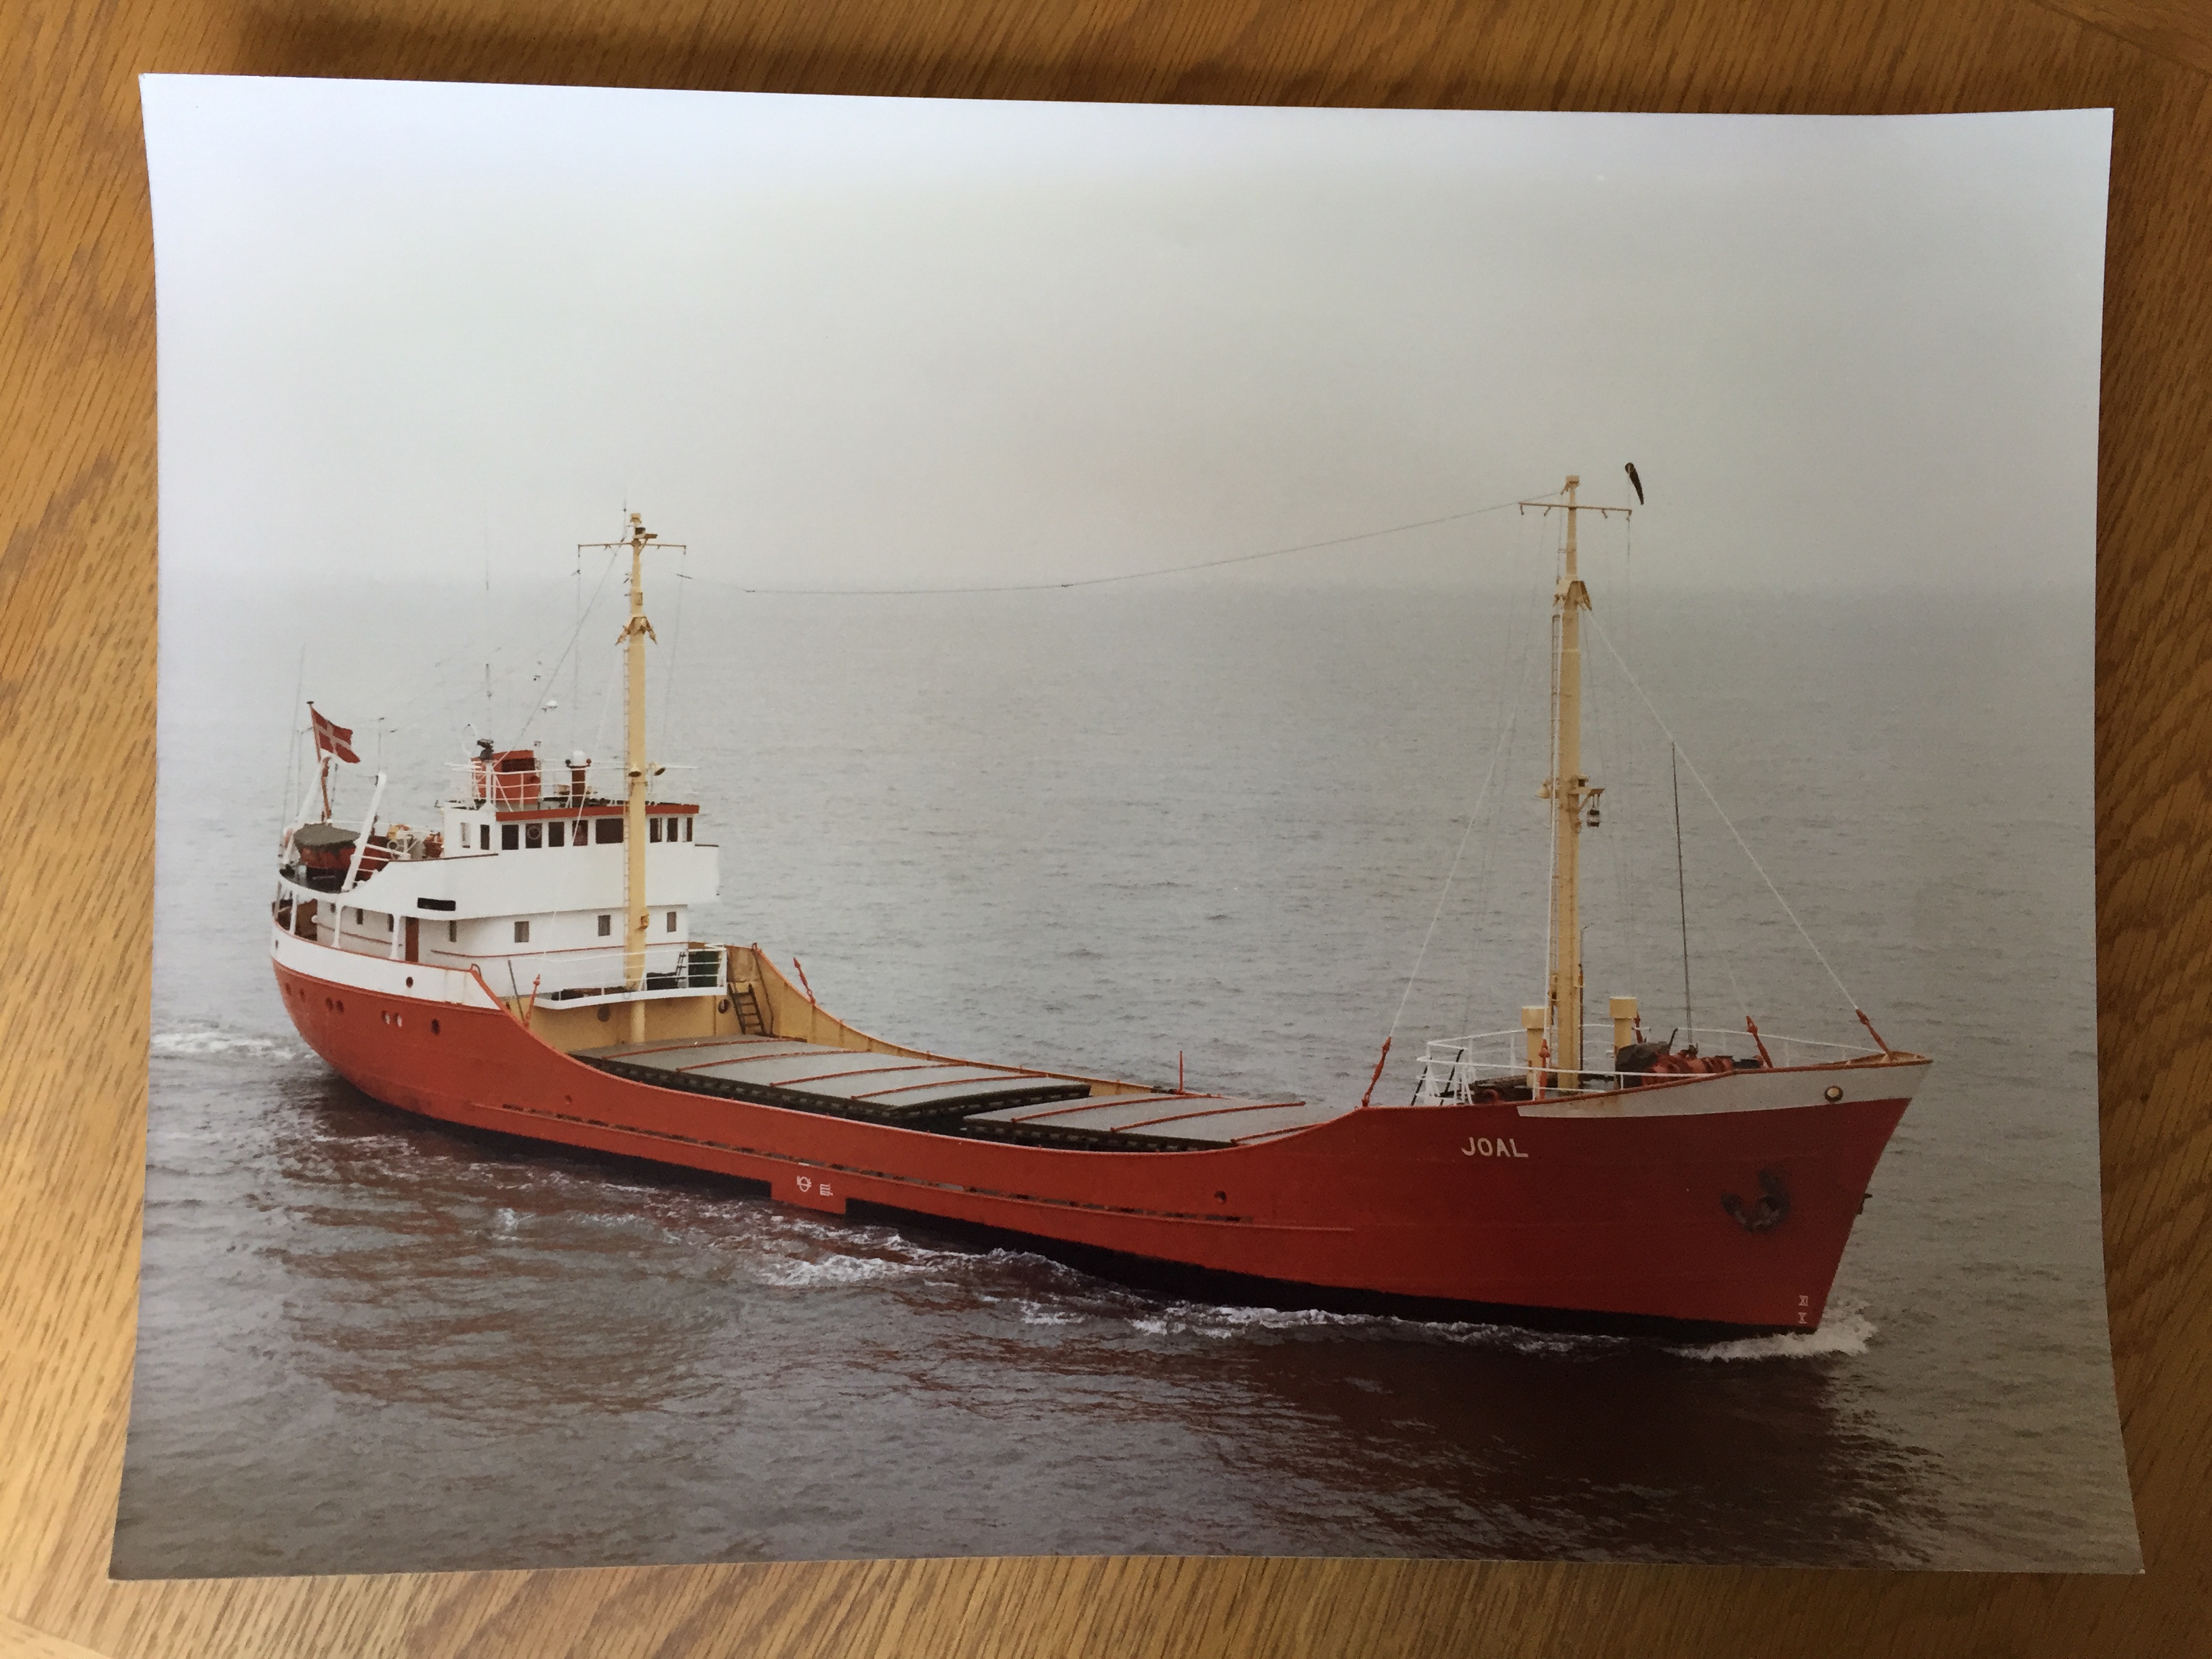 LARGE SIZE COLOUR PHOTOGRAPH OF THE CONTAINER VESSEL JOAL